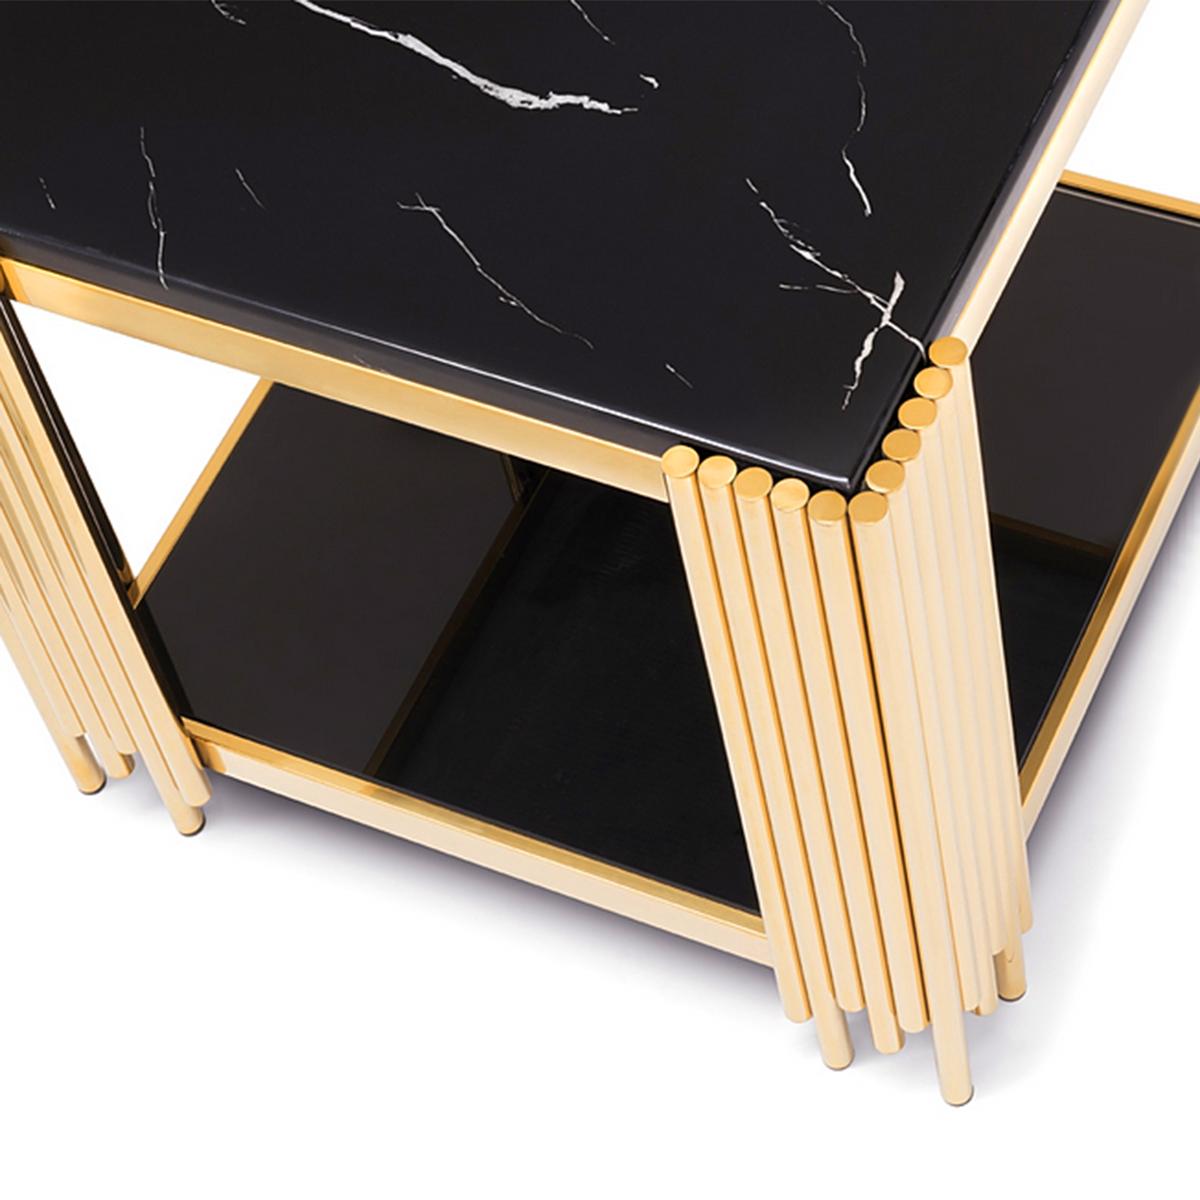 Resin Ororods Squares Side Table For Sale